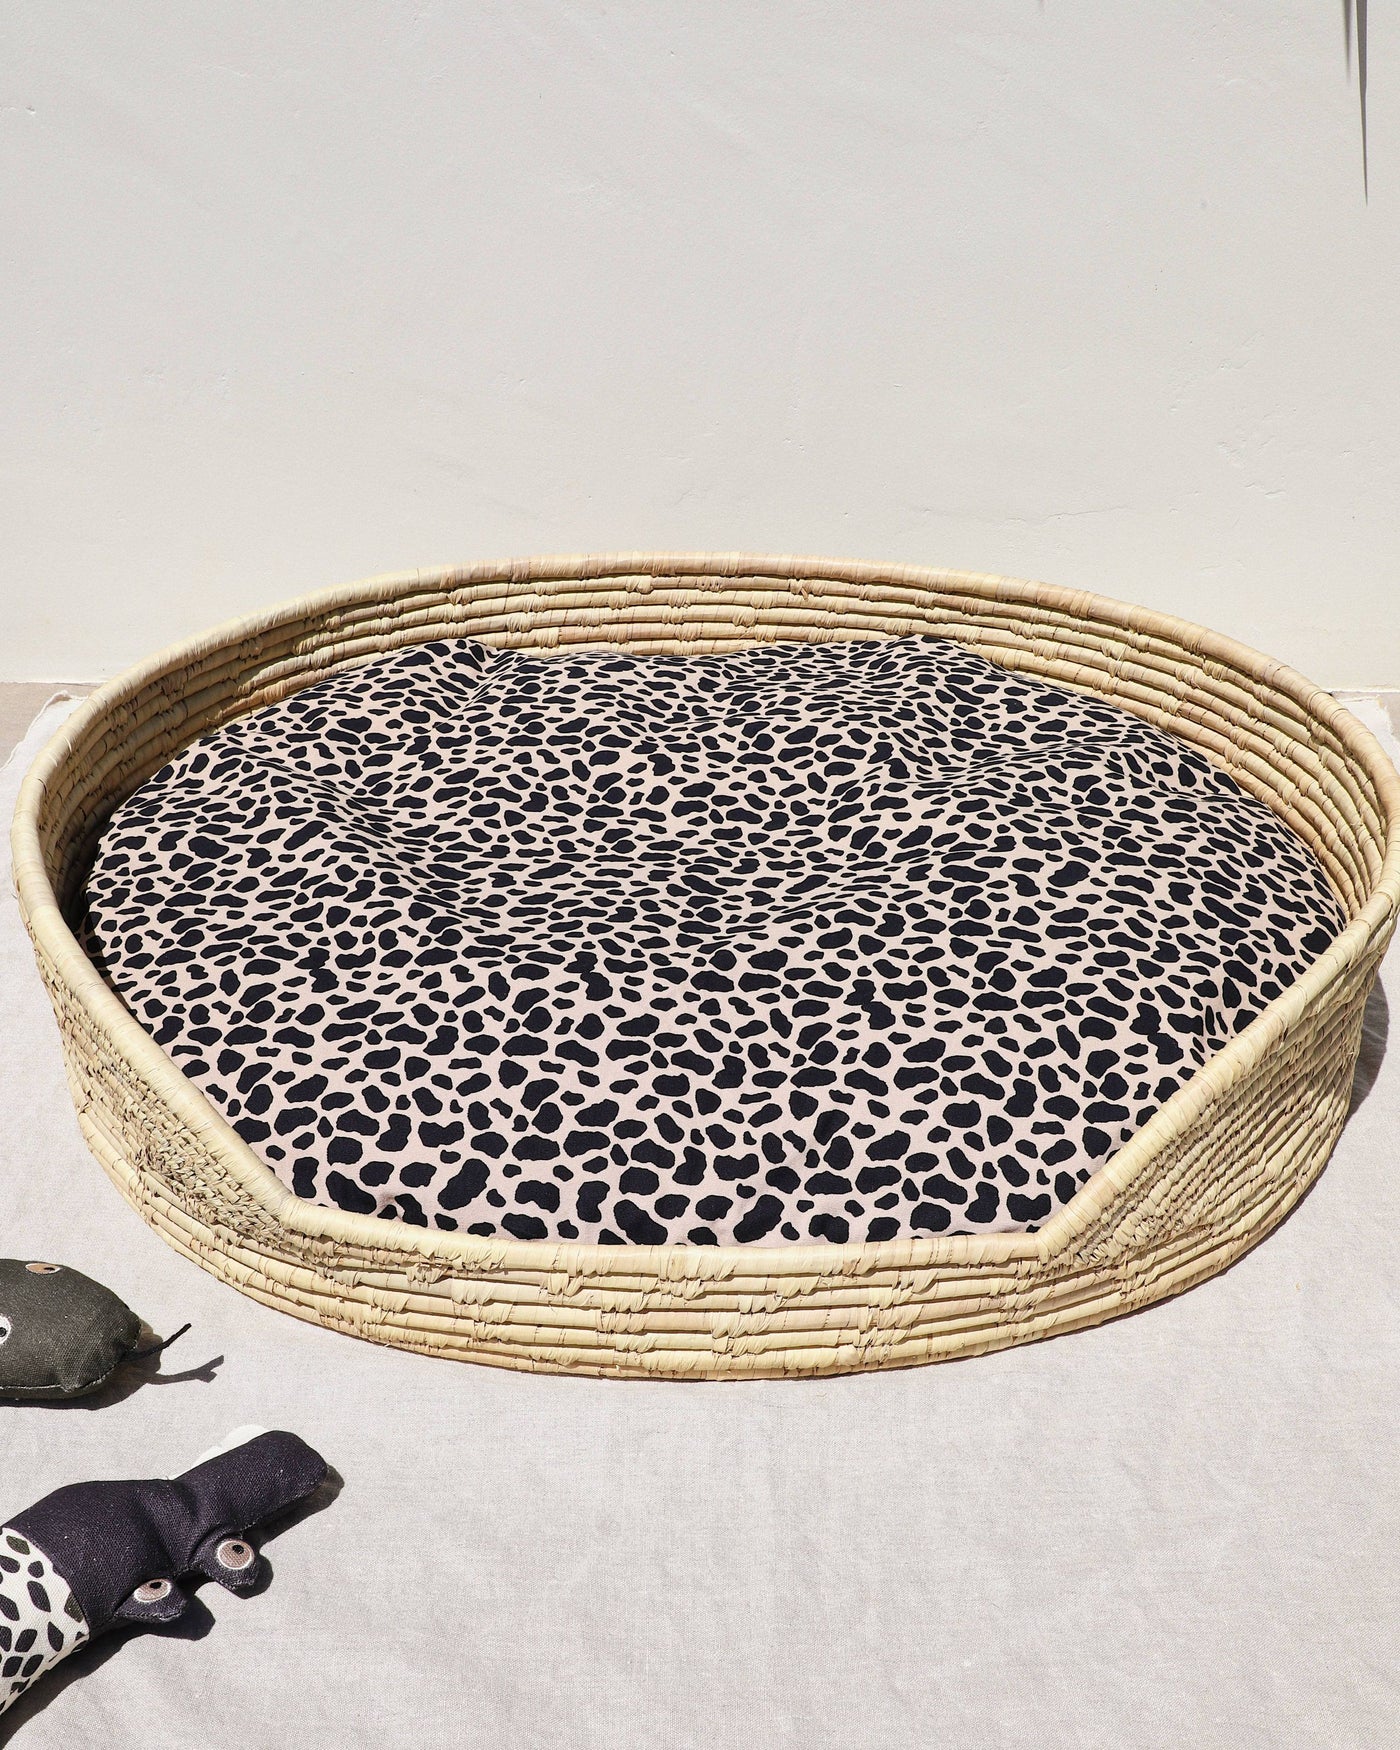 Mangrove Woven Palm Basket Bed